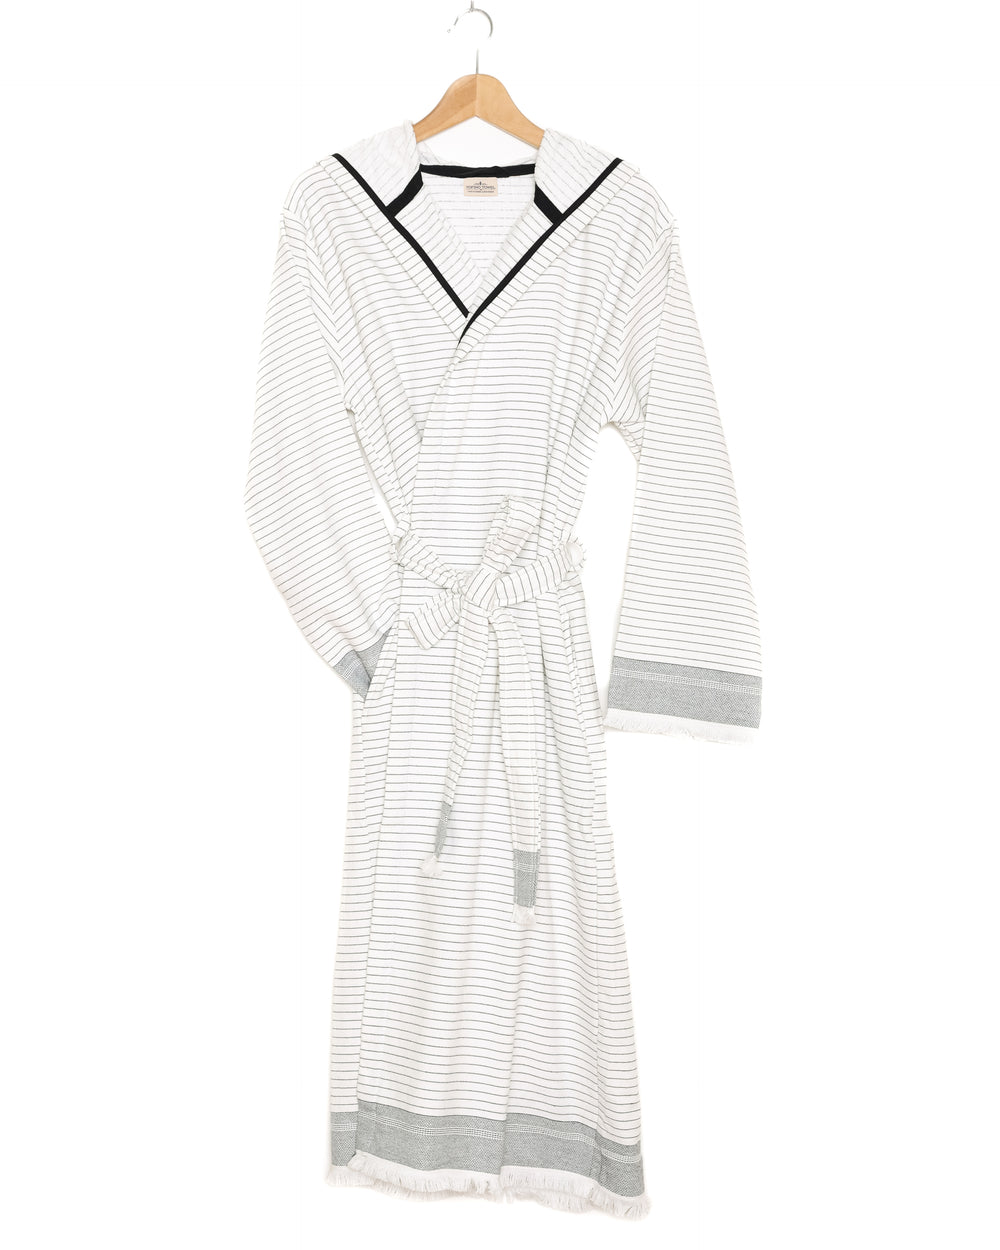 The Silas Robe from Tofino Towel Company - off white with black thin horizontal stripes and a hood.  Photographed on a wooden hanger on a white background.